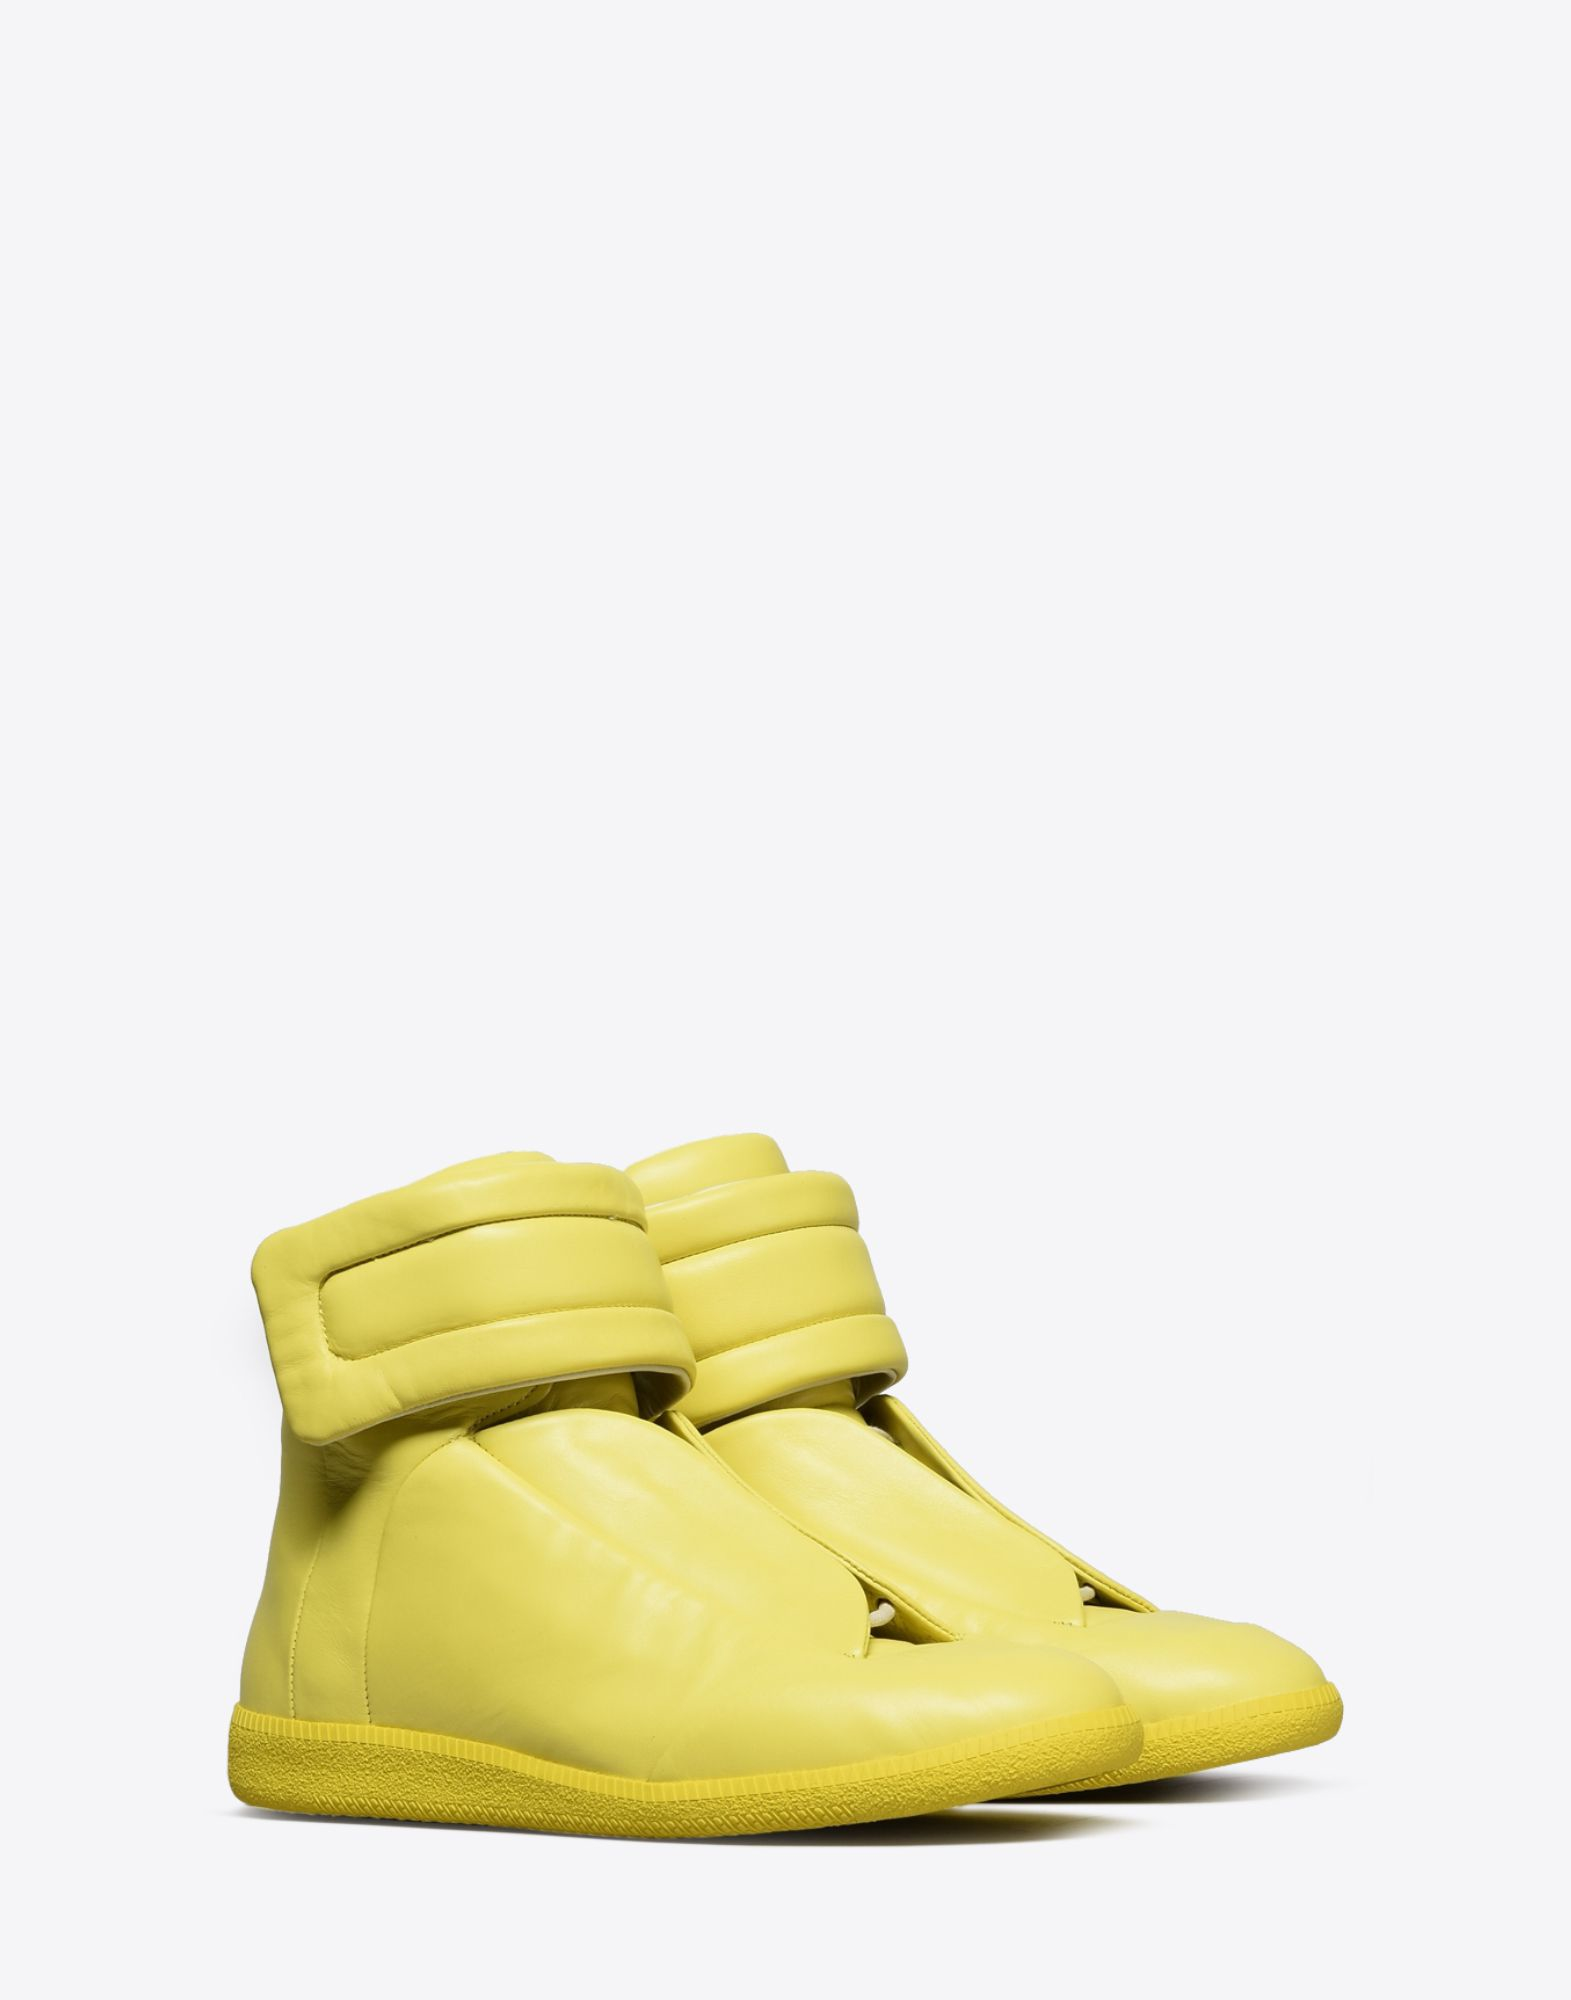 Lyst - Maison Margiela Future High-Top Leather Sneakers in Yellow